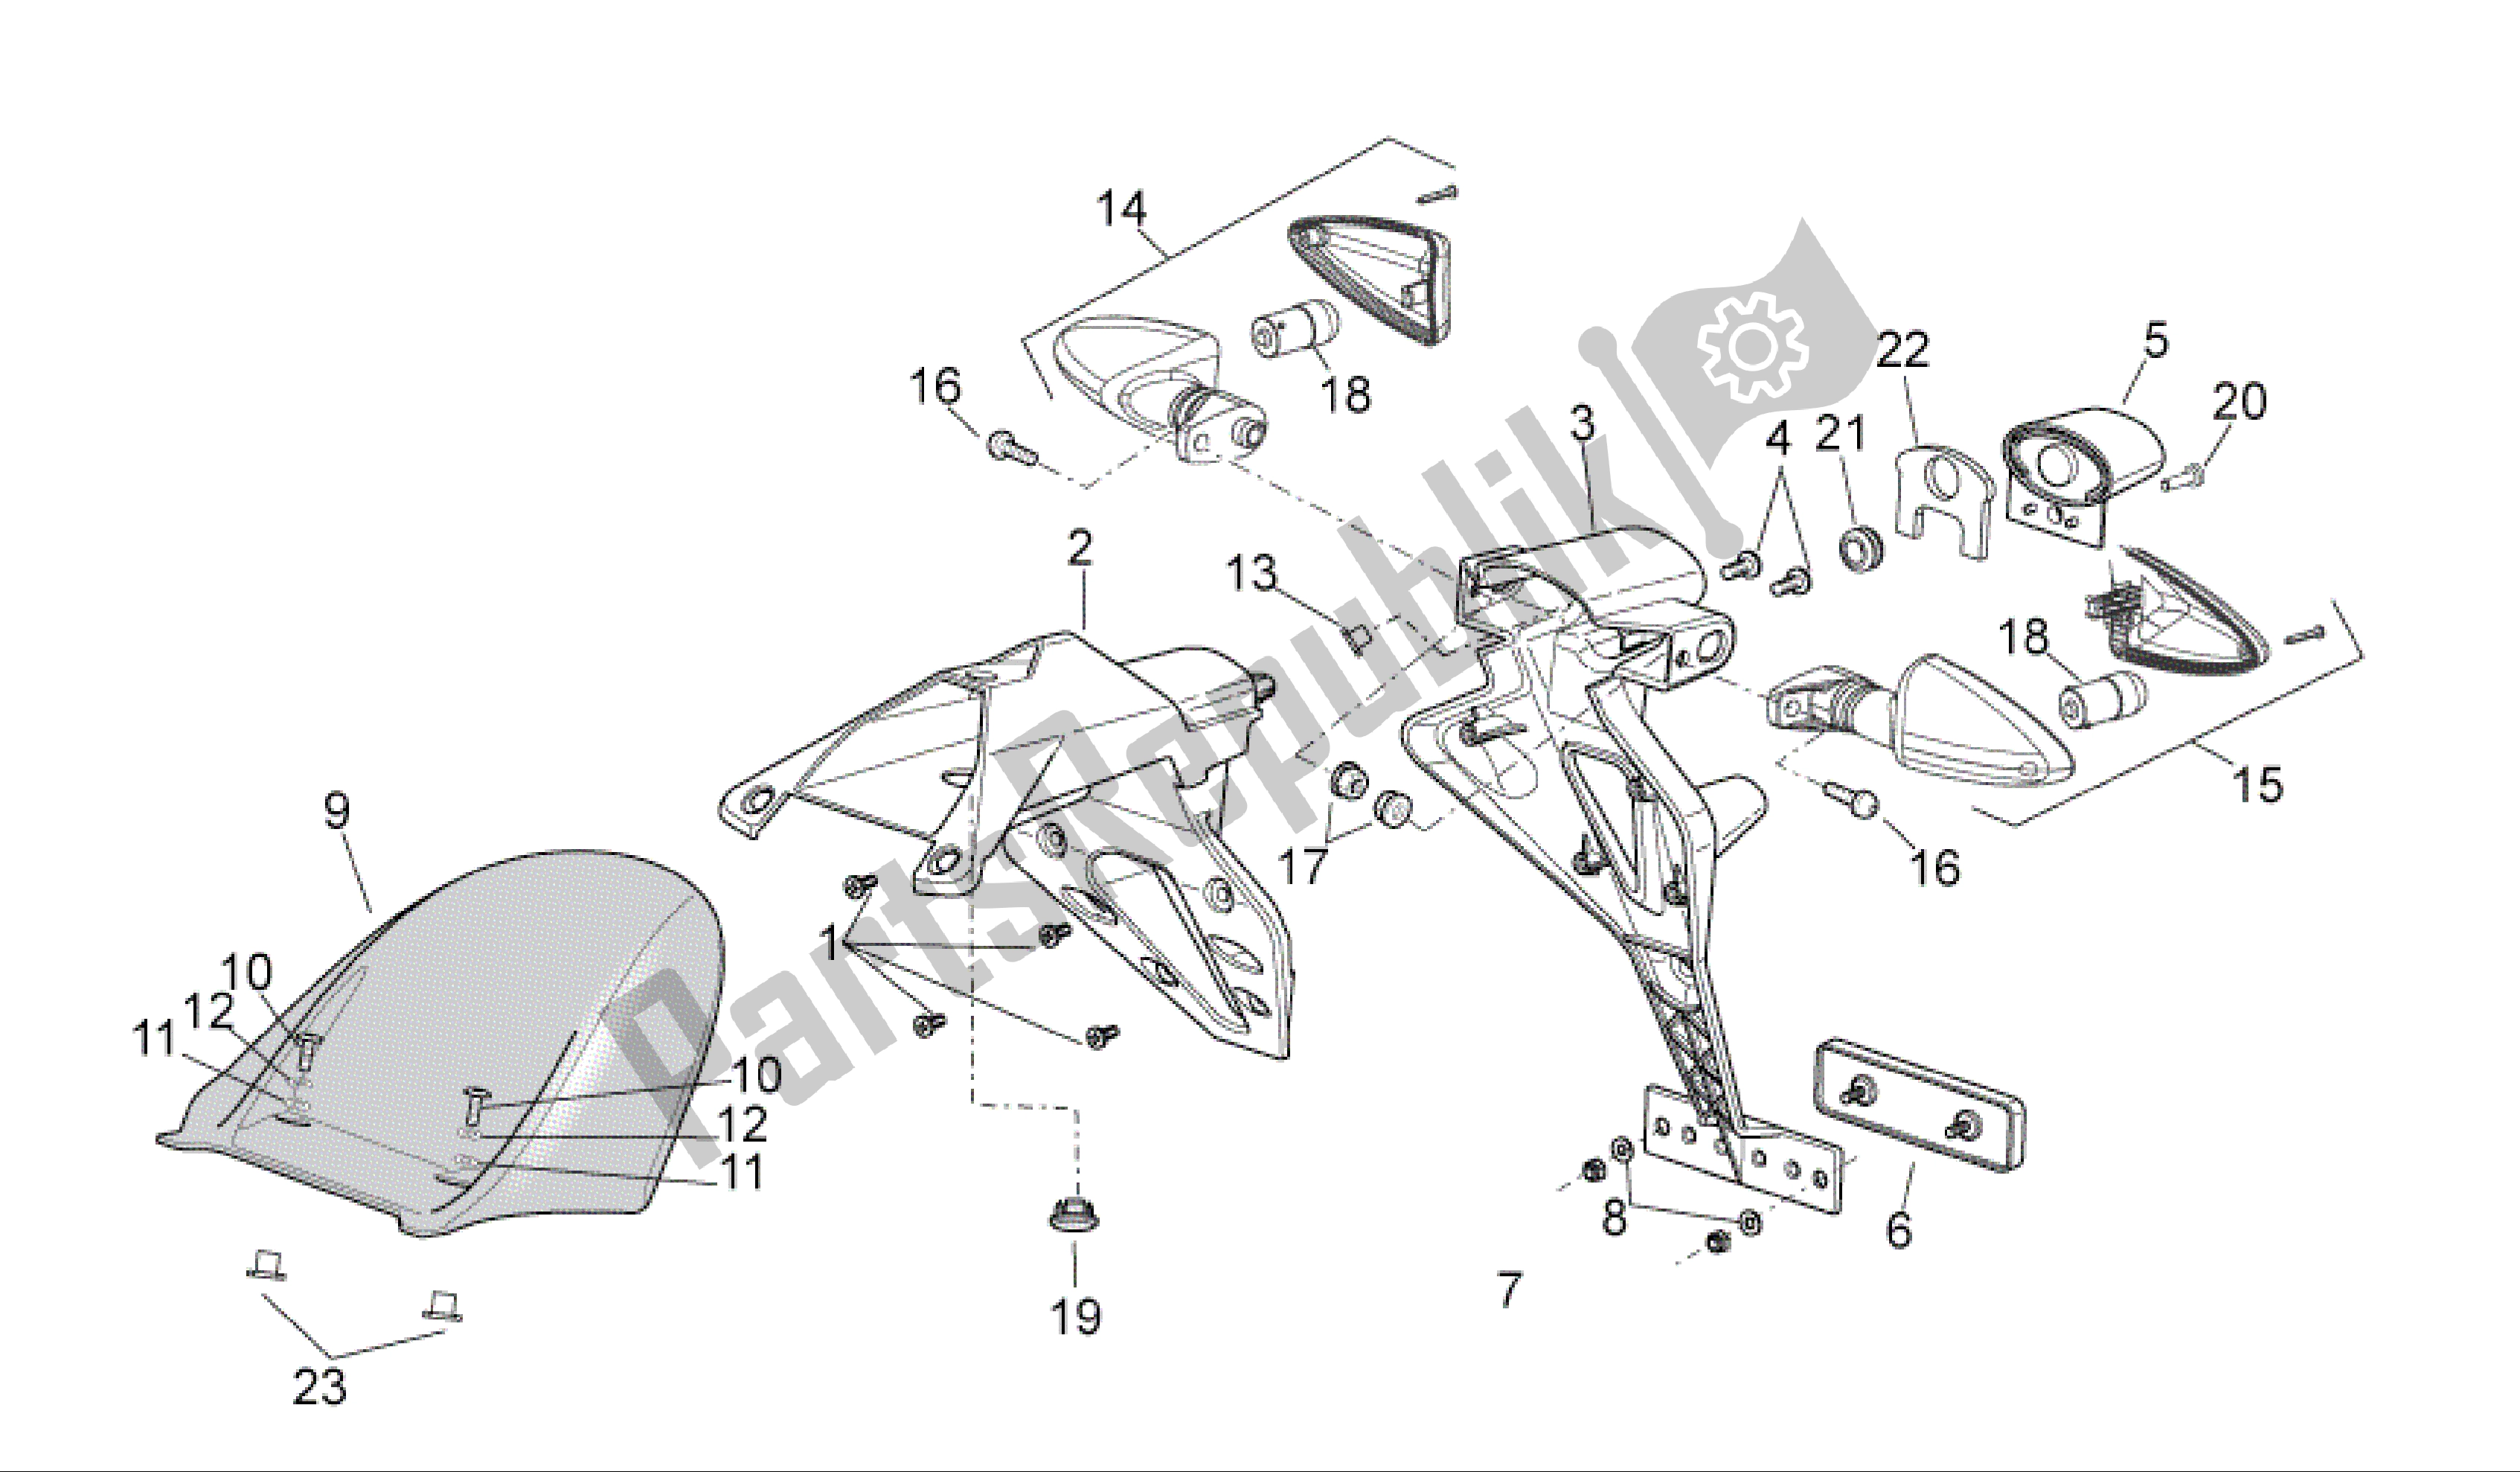 All parts for the Rear Body Ii of the Aprilia RSV4 R 3980 1000 2009 - 2010